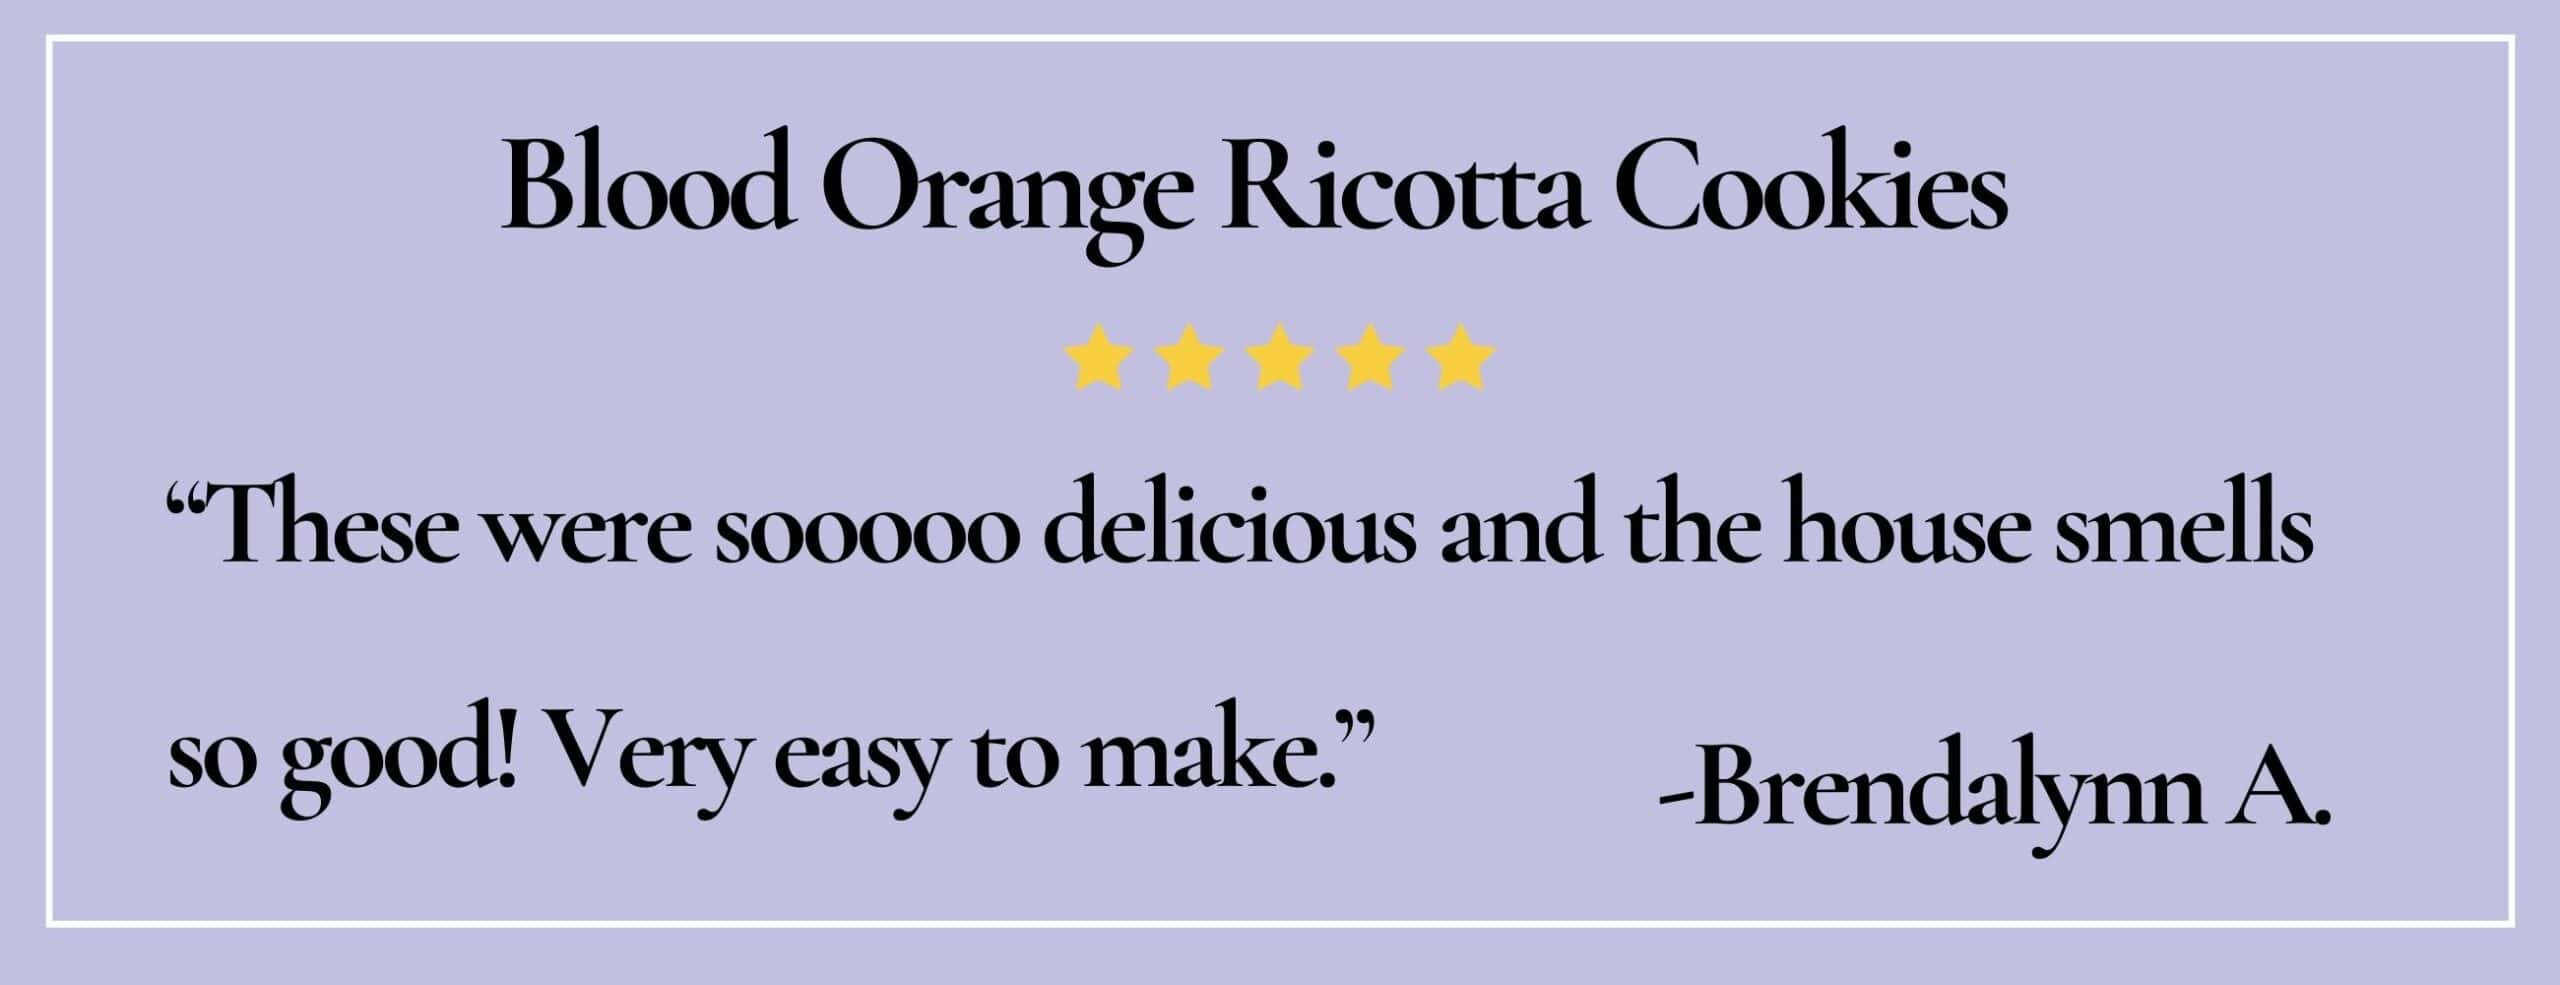 text box with quote: "These were sooooo delicious and the house smells so good! Very easy to make."-Brendalynn A.